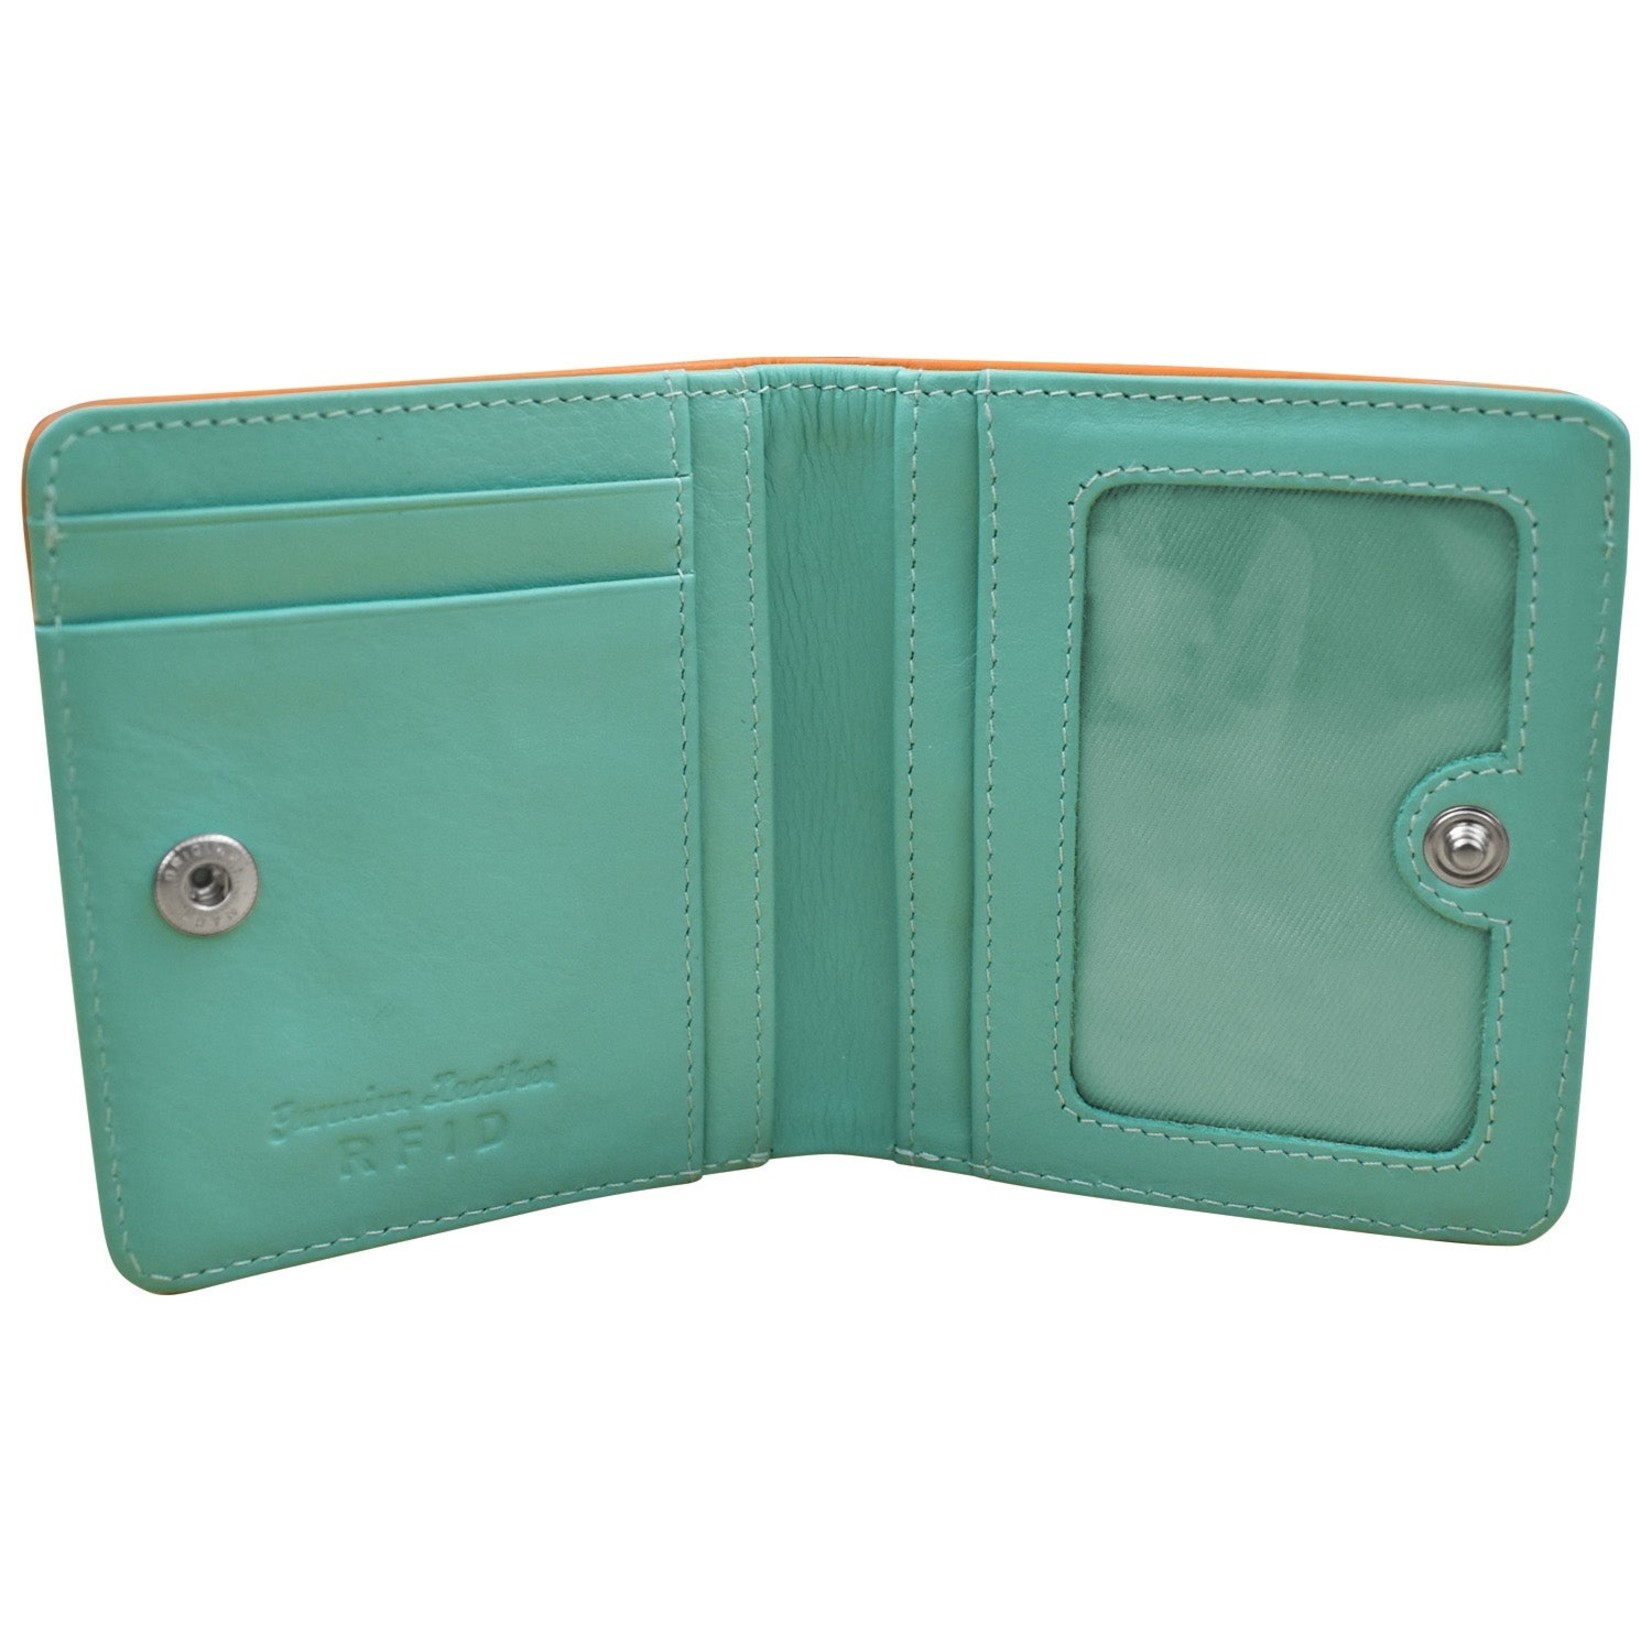 Leather Handbags and Accessories 7831 Papaya/Turquoise - RFID Mini Wallet Two Toned